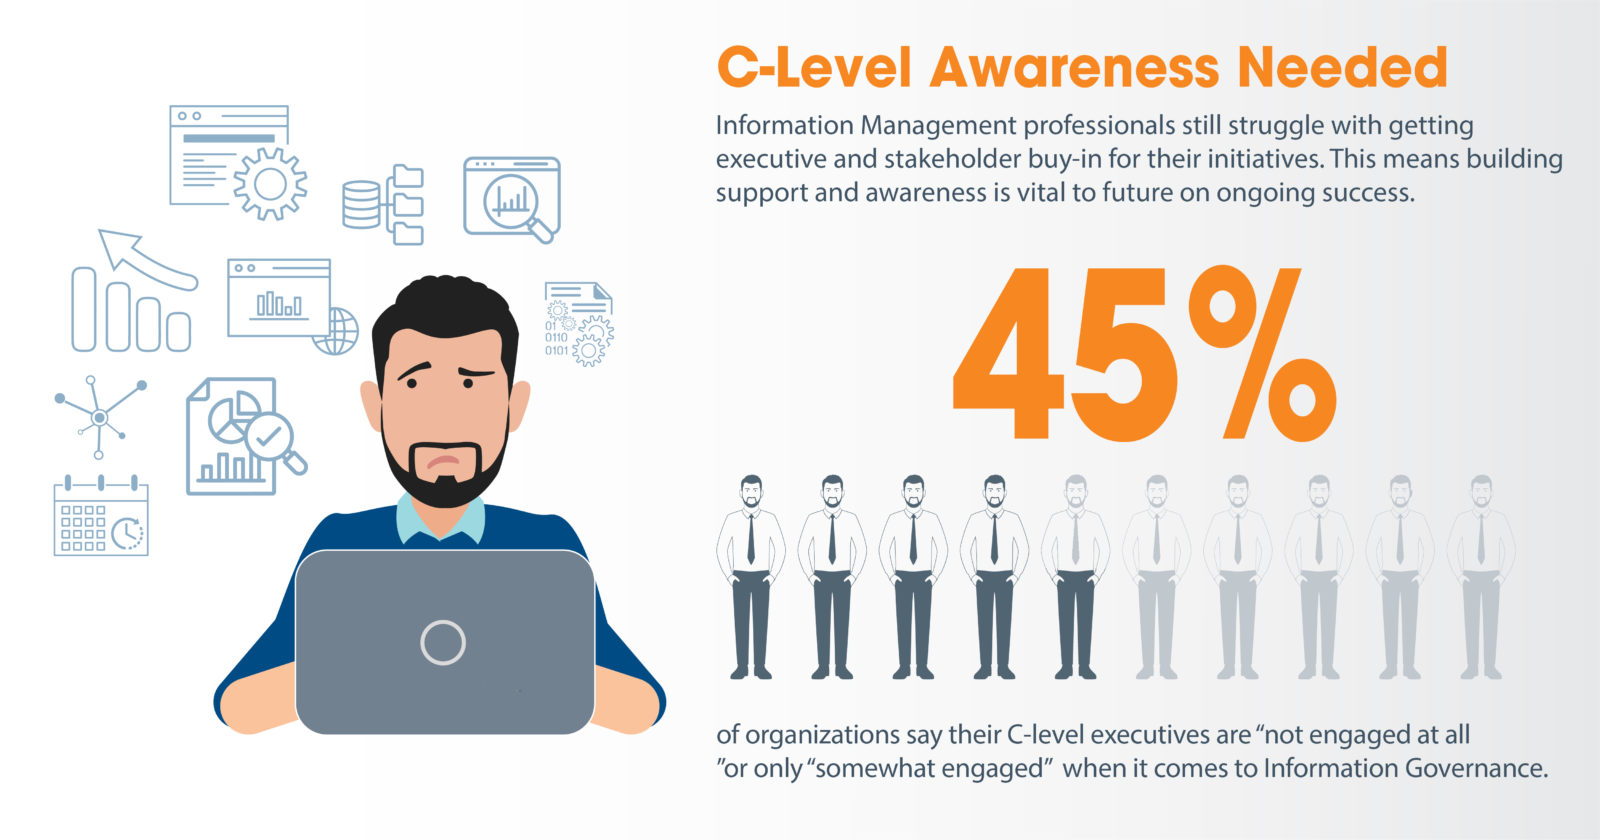 45% of organizations say their C-level executives are "not engaged" or "somewhat engaged" in information governance